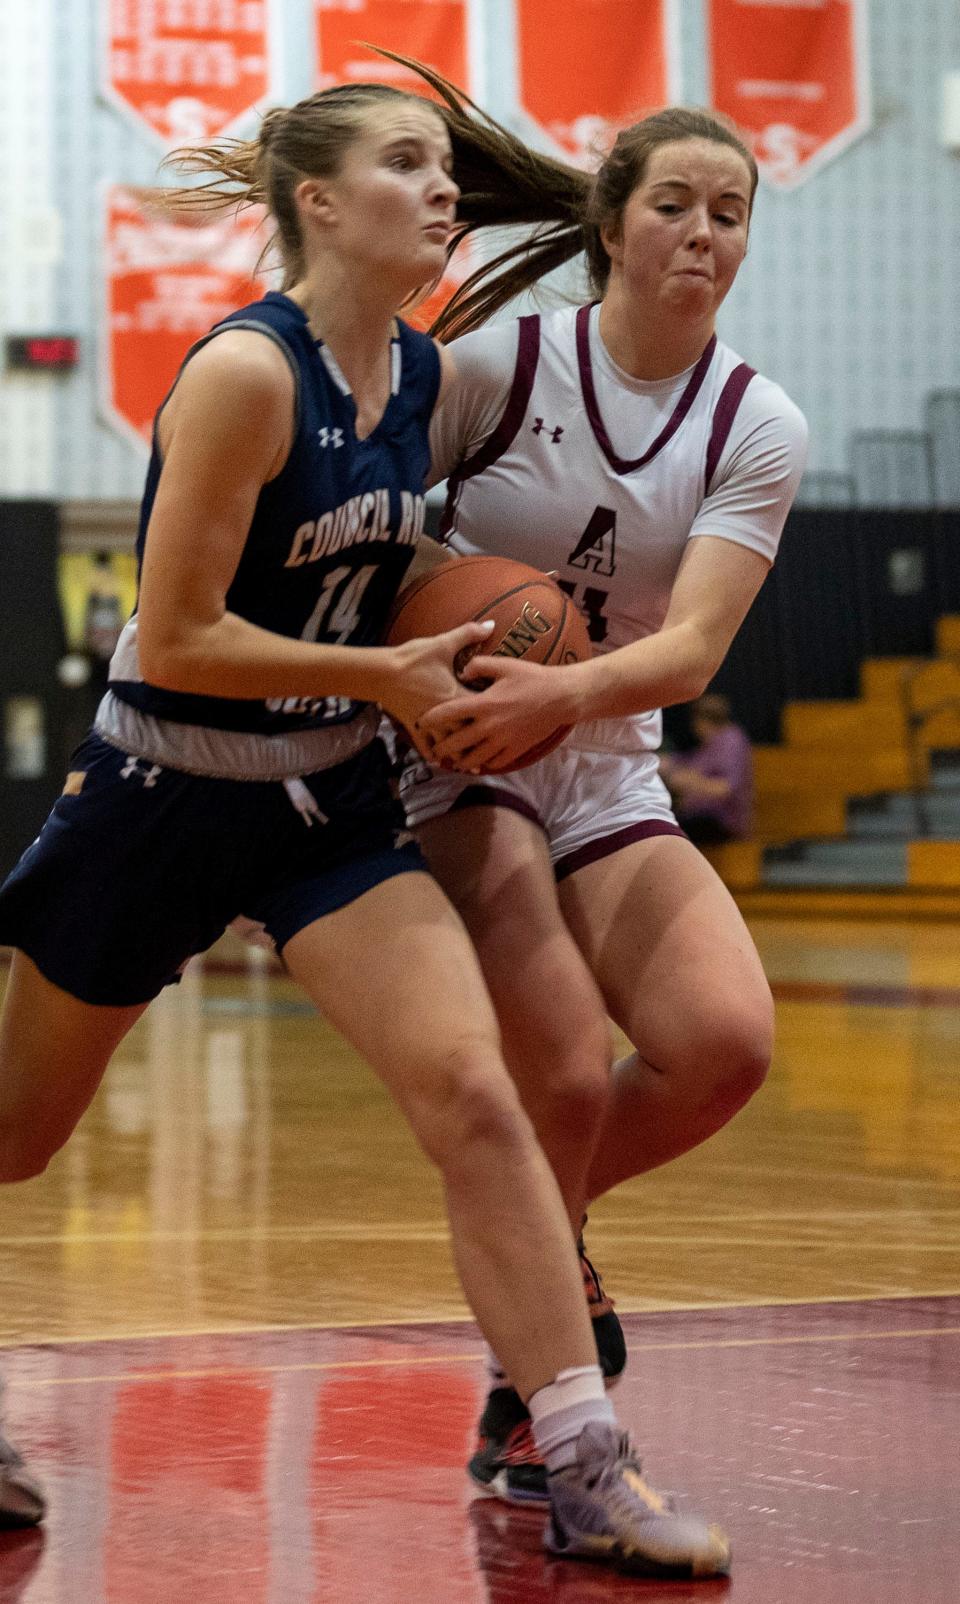 Council Rock South's Kathryn O'Kane (14) against Abington's Piper McGinley (11) during their girls basketball game in the Jim Church Classic at Souderton High School in Souderton on Friday, Dec. 1, 2023

[Daniella Heminghaus | Bucks County Courier Times]